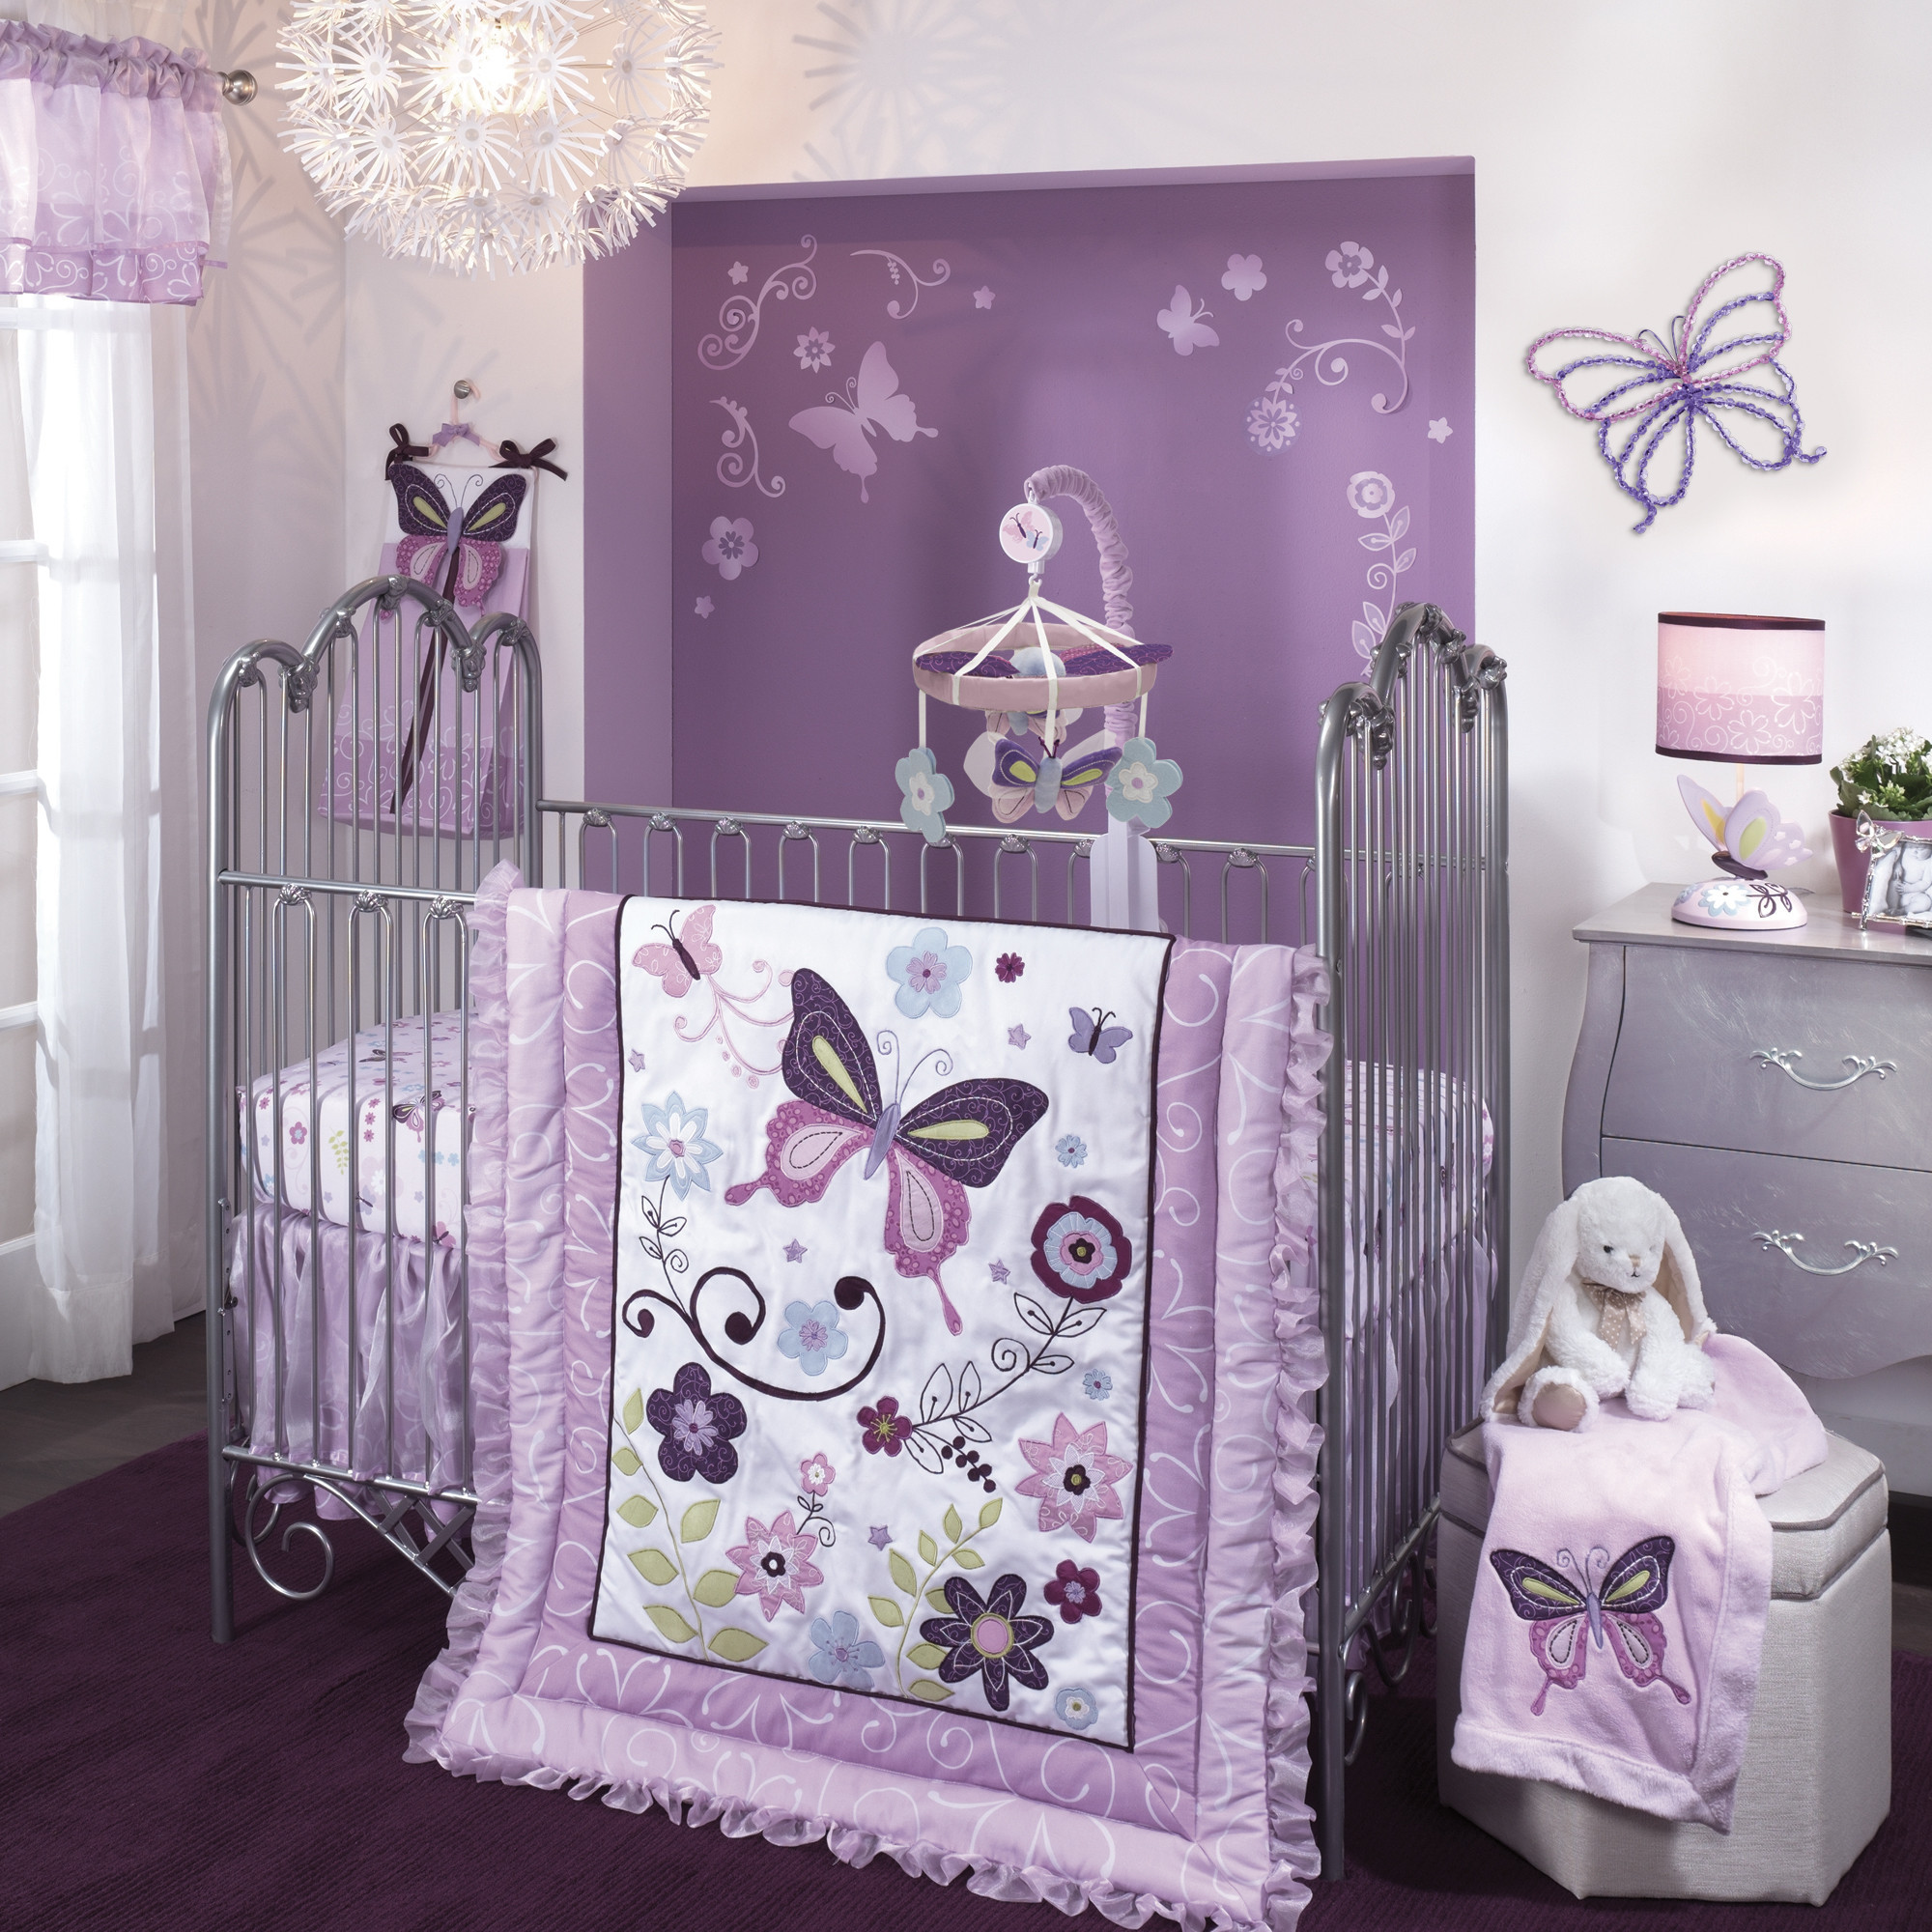 Butterfly Lane Baby Crib Bedding By Lambs Ivy